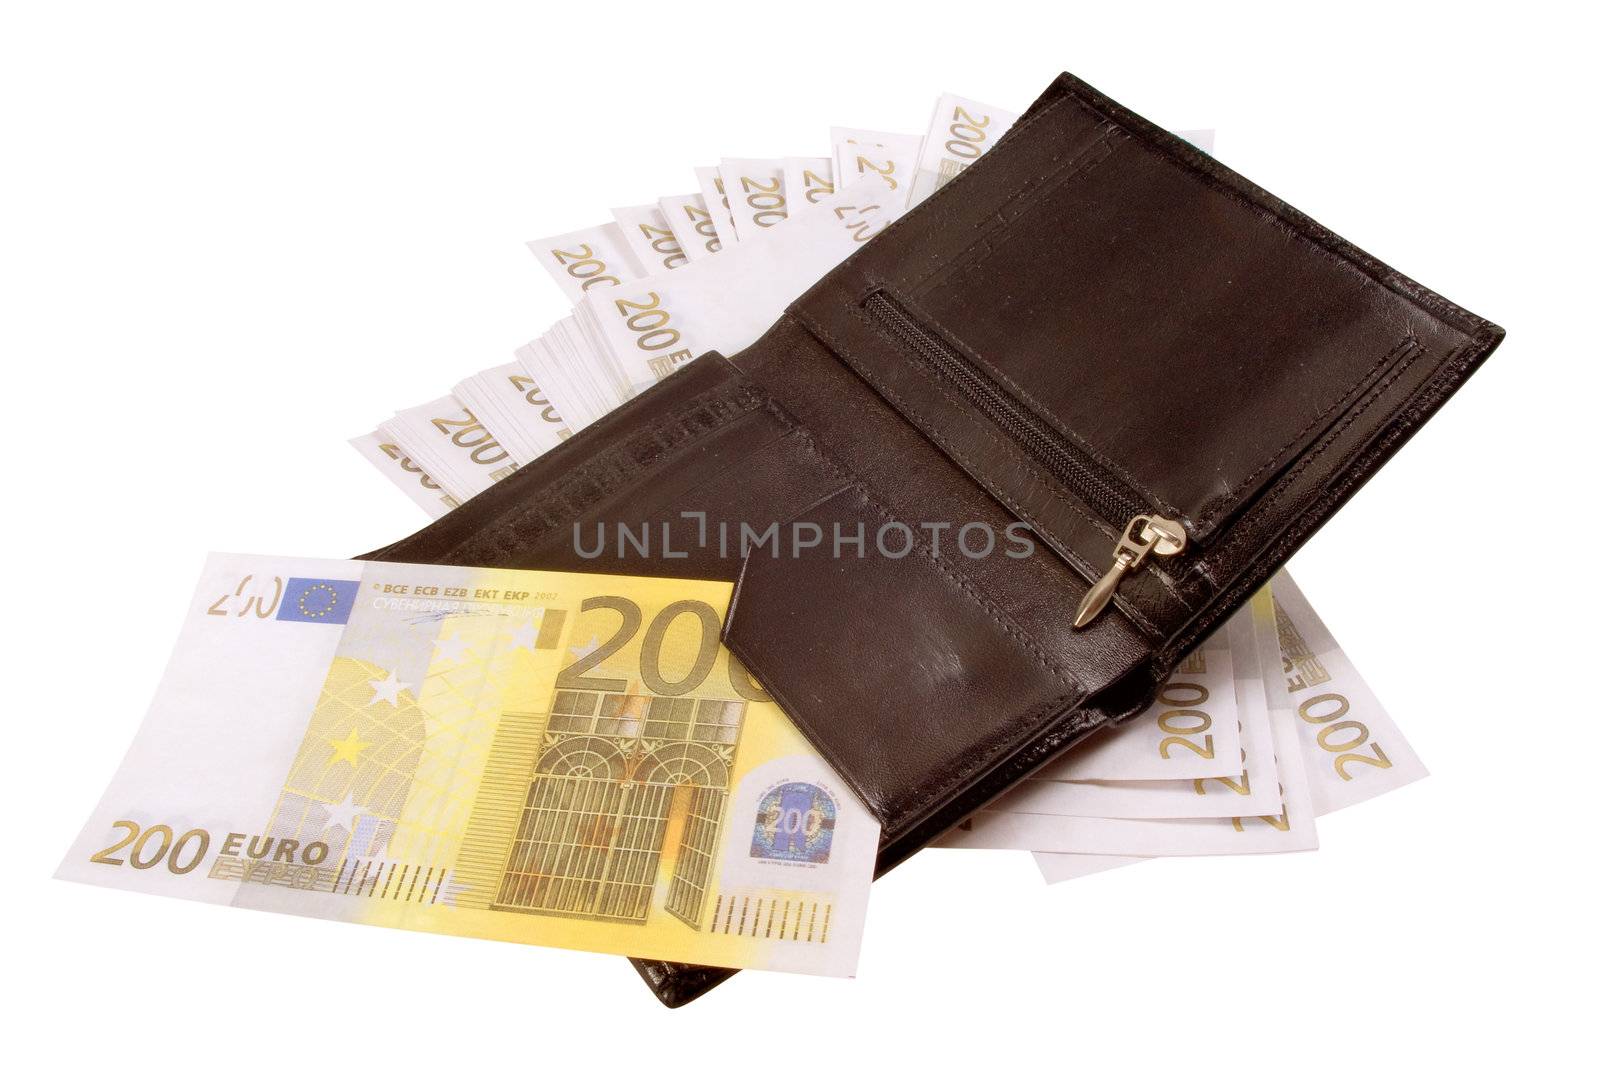 Black purse with lots of notes of 200 euro by BIG_TAU